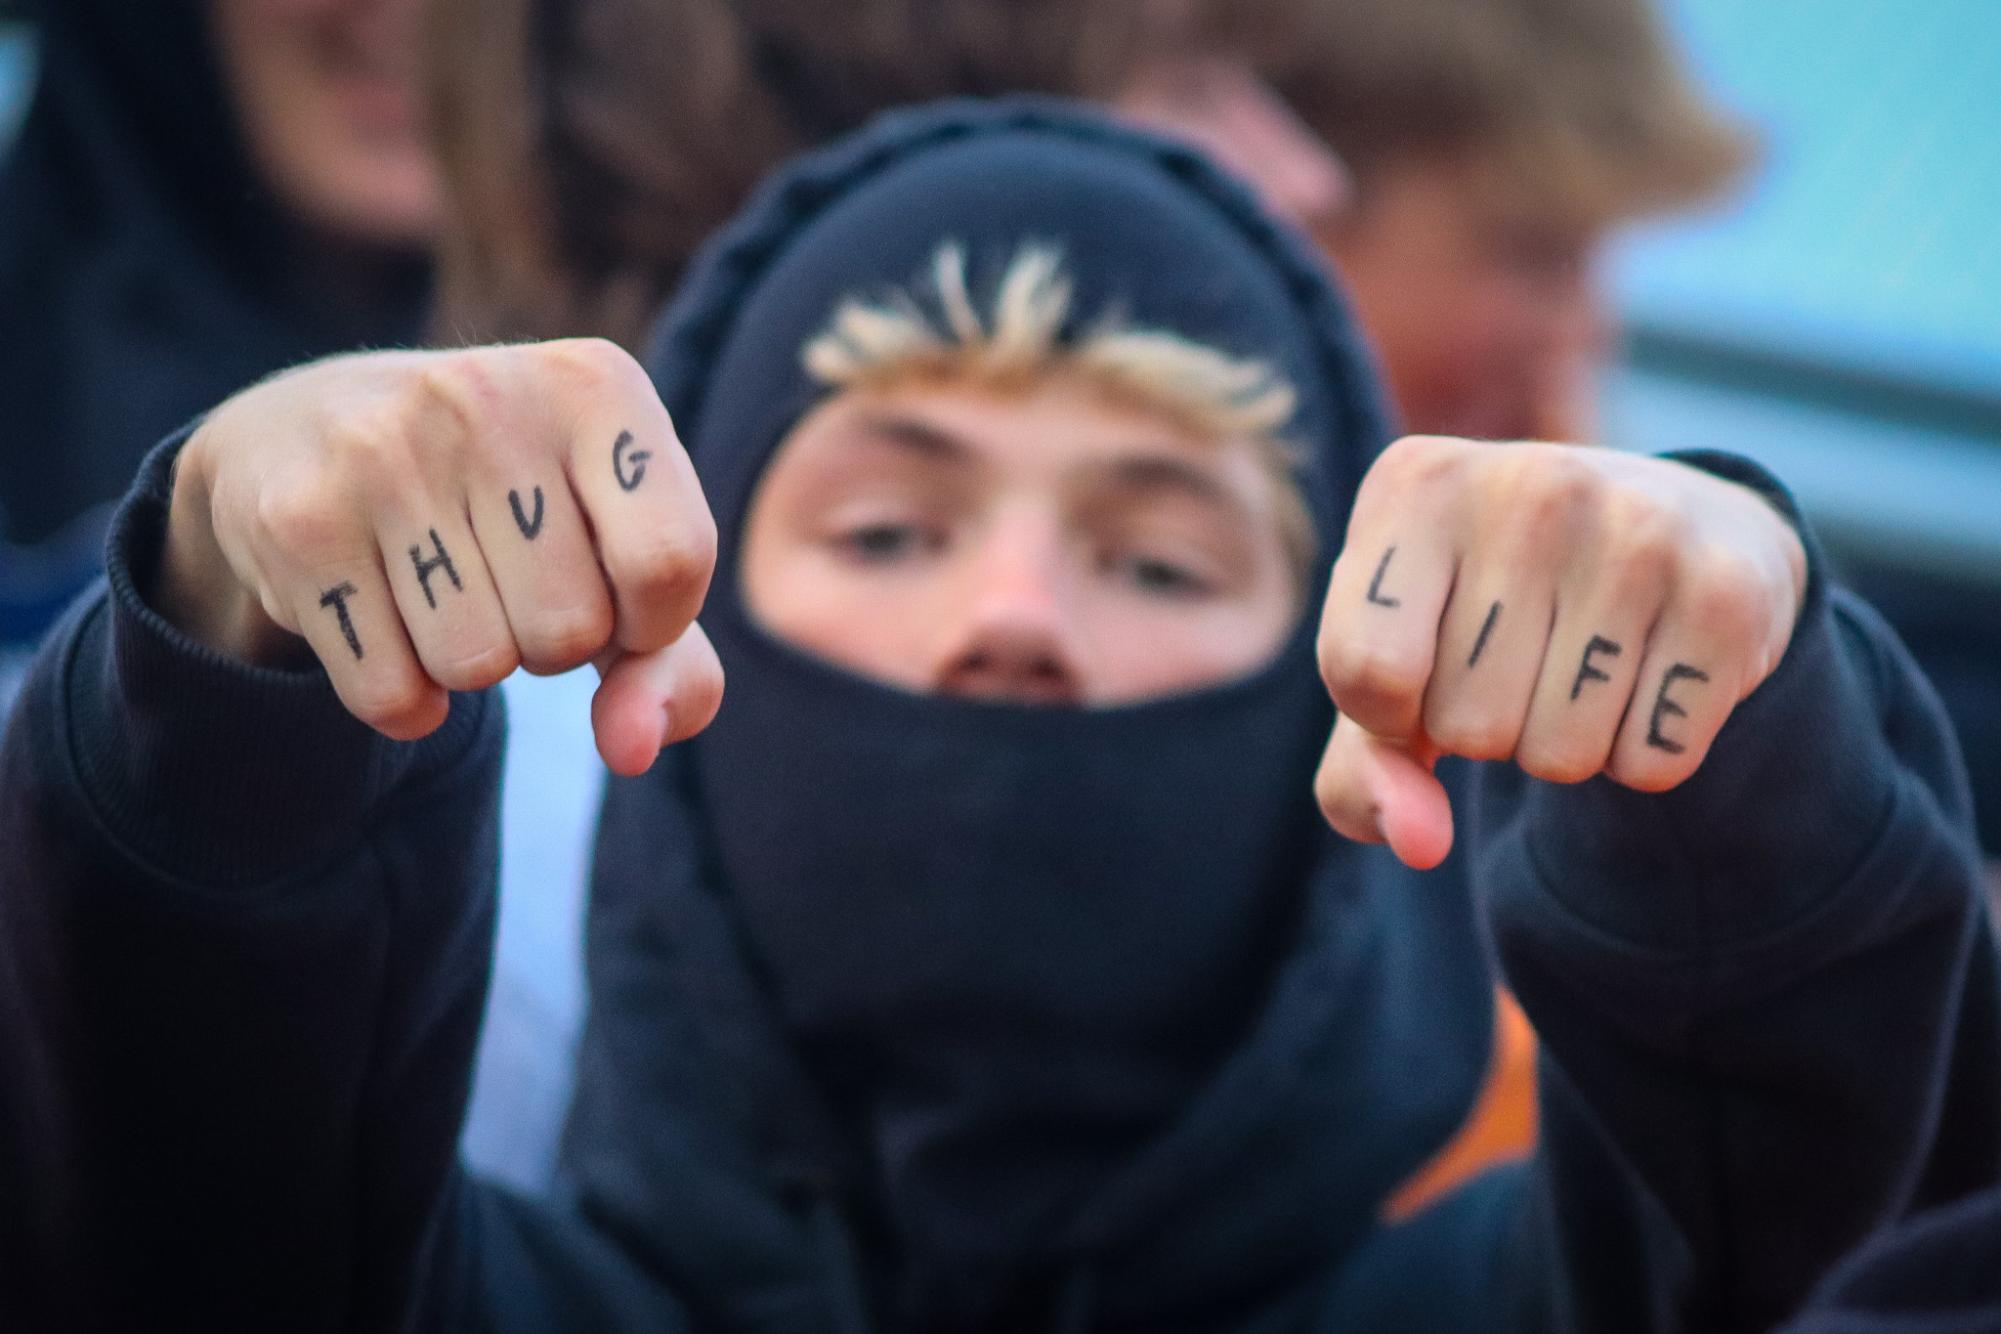 Staying true to his prisoner persona, sophomore Grayson Sutter showed off his tatted accessories. 